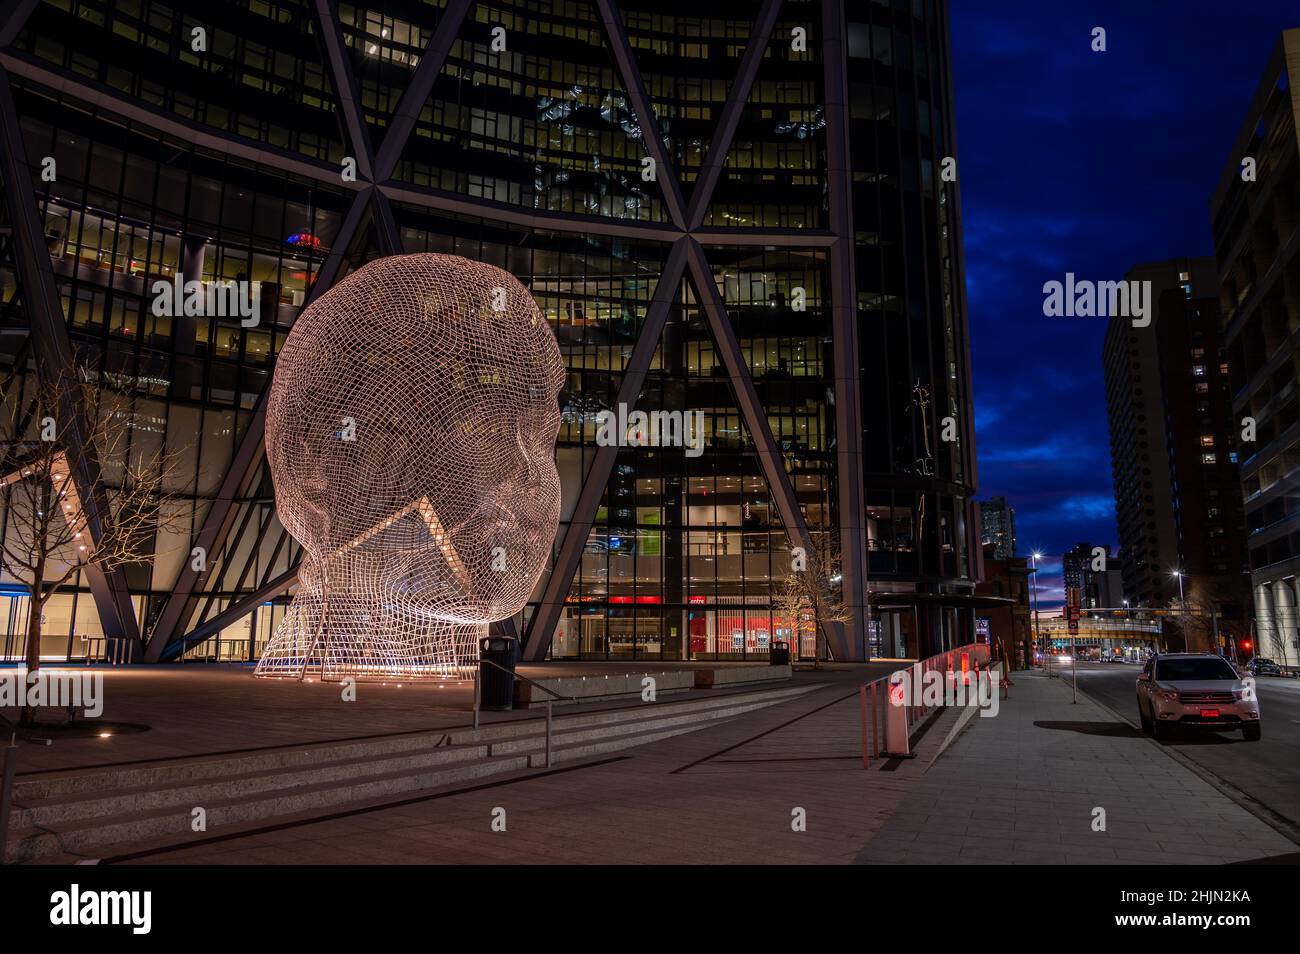 Calgary, Alberta - January 30, 2022: View of the Wonderland sculpture outside the Bow Tower in Calgary. Stock Photo